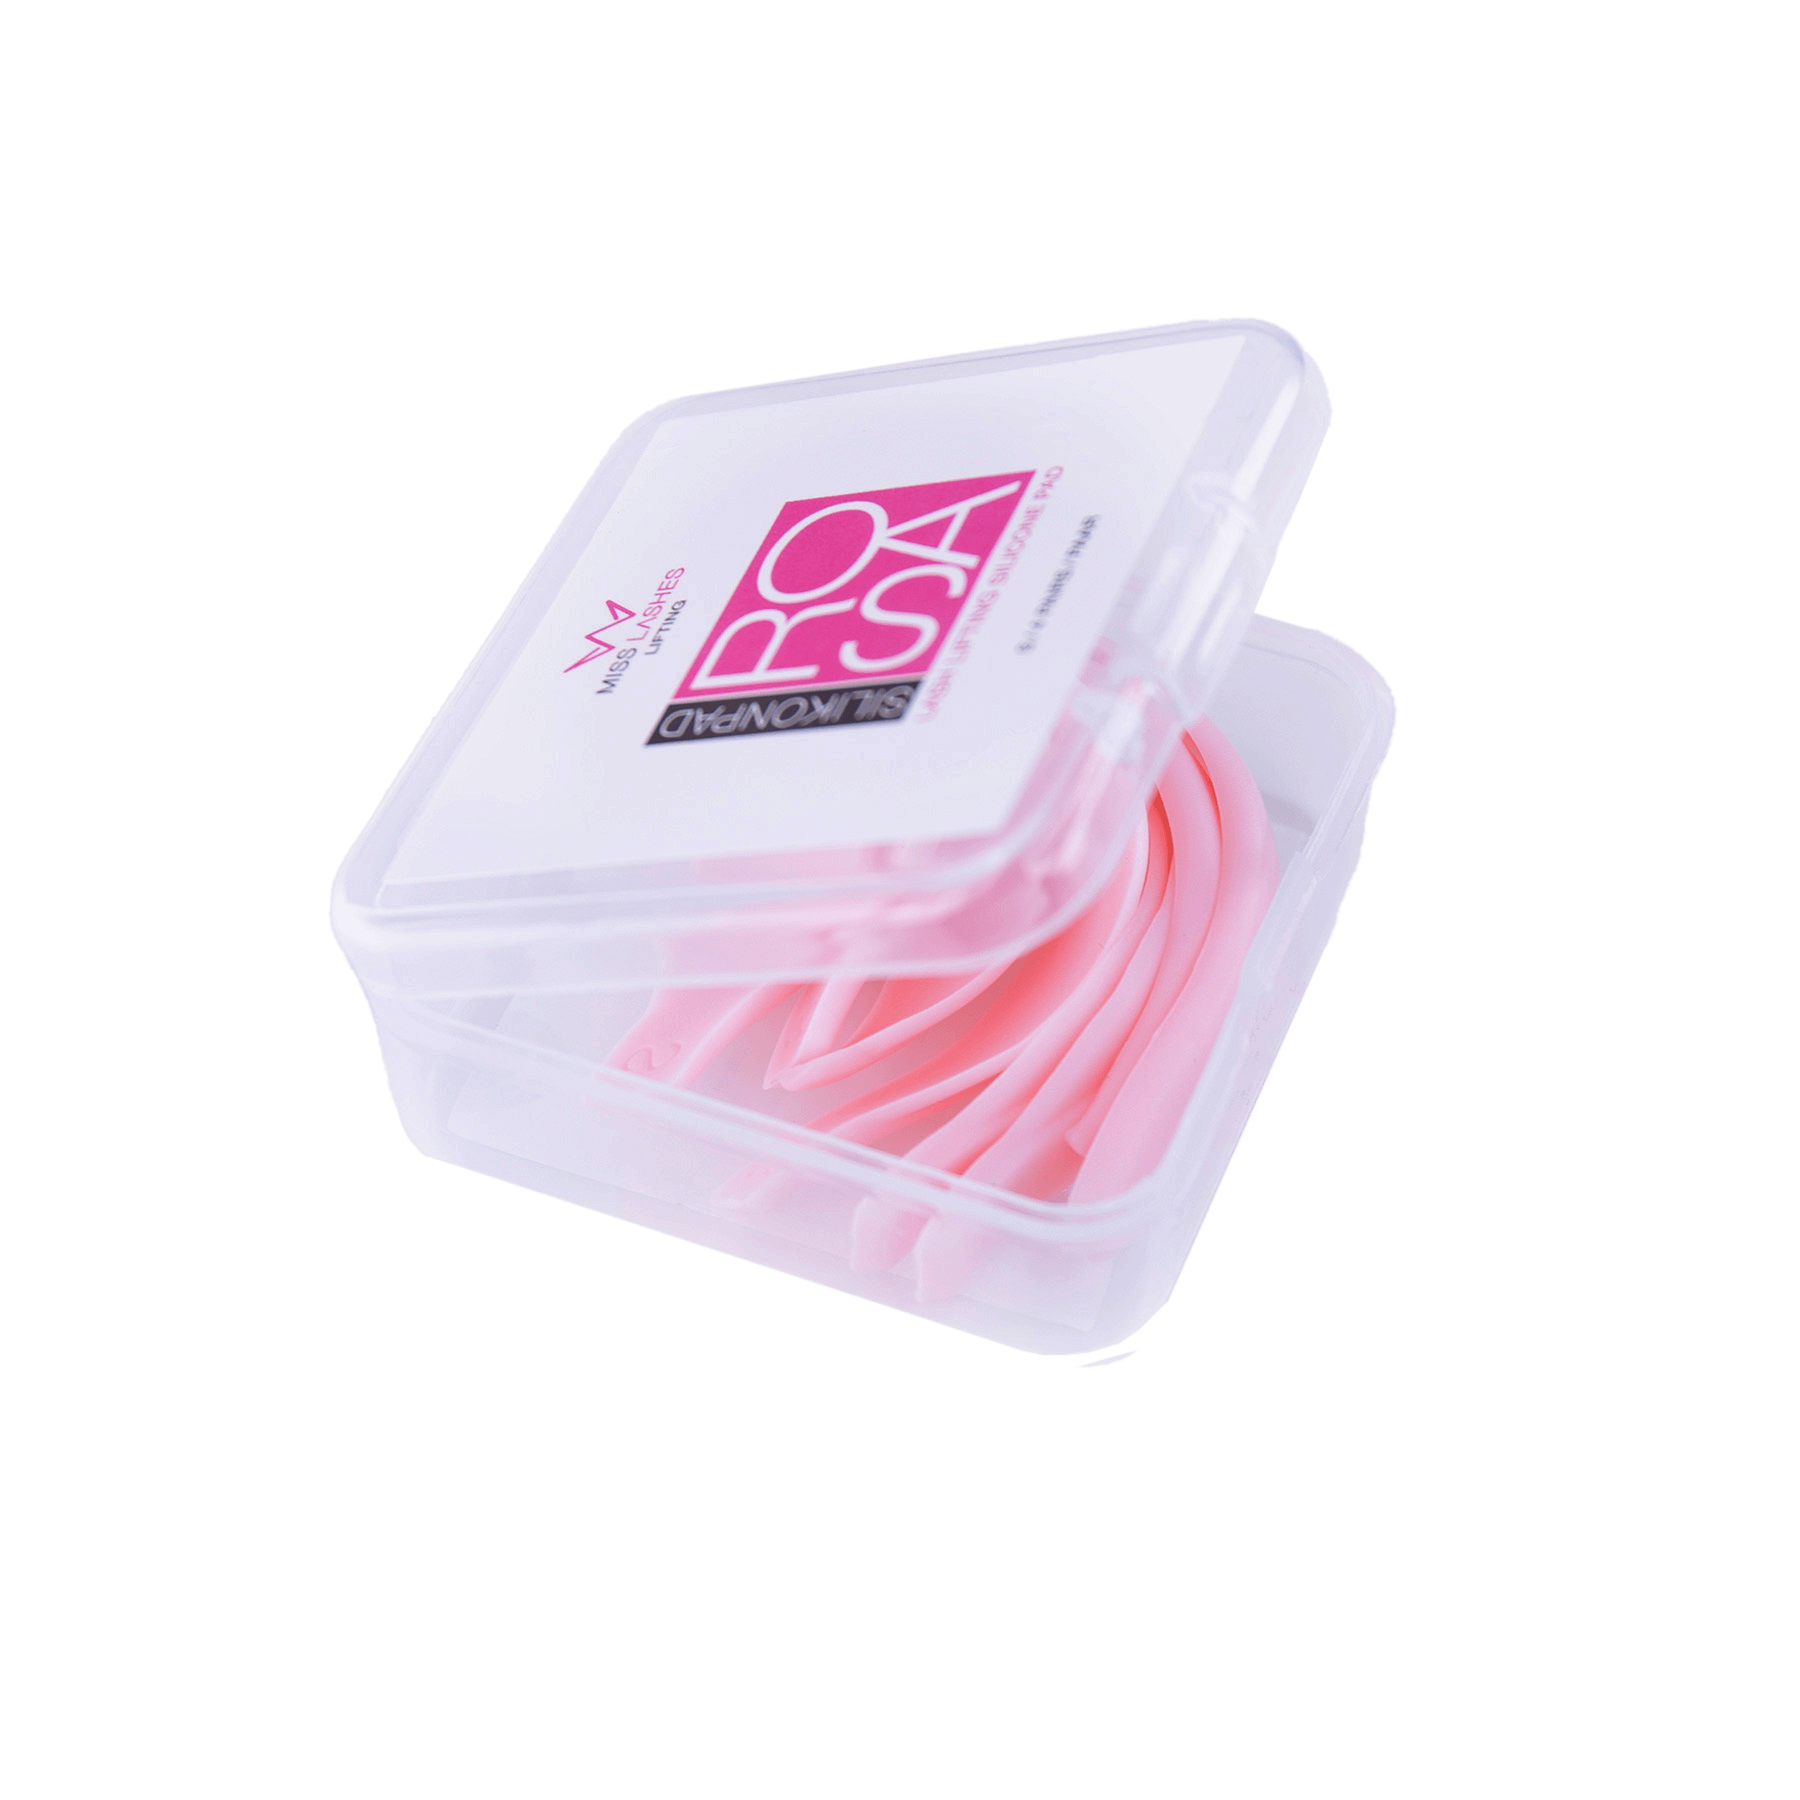 MISS LASHES Selbsthaftende Silikonpads in Rosa - L-Curl 4 Paare Gr. S